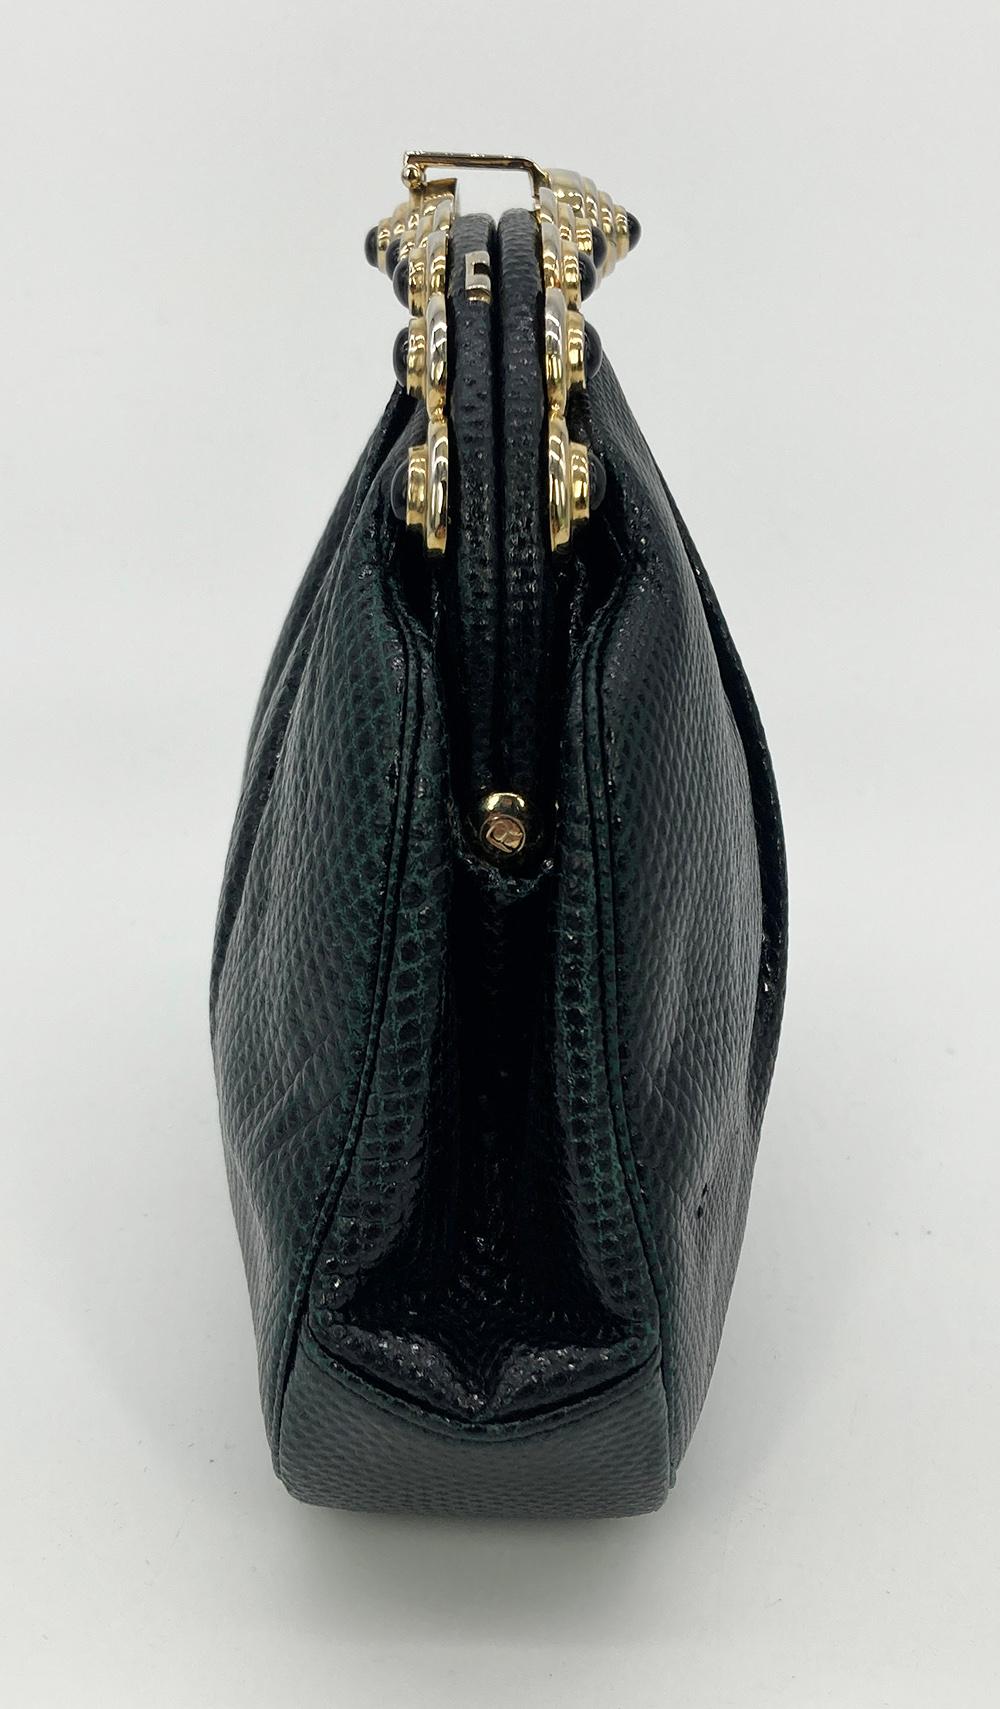 Judith Leiber Black Lizard Gold Top Black Stone Clutch in good condition. Black lizard exterior trimmed with gold hardware and black gemstones along top edge. Lift latch closure opens to a black nylon interior with 2 side slit pockets and attached